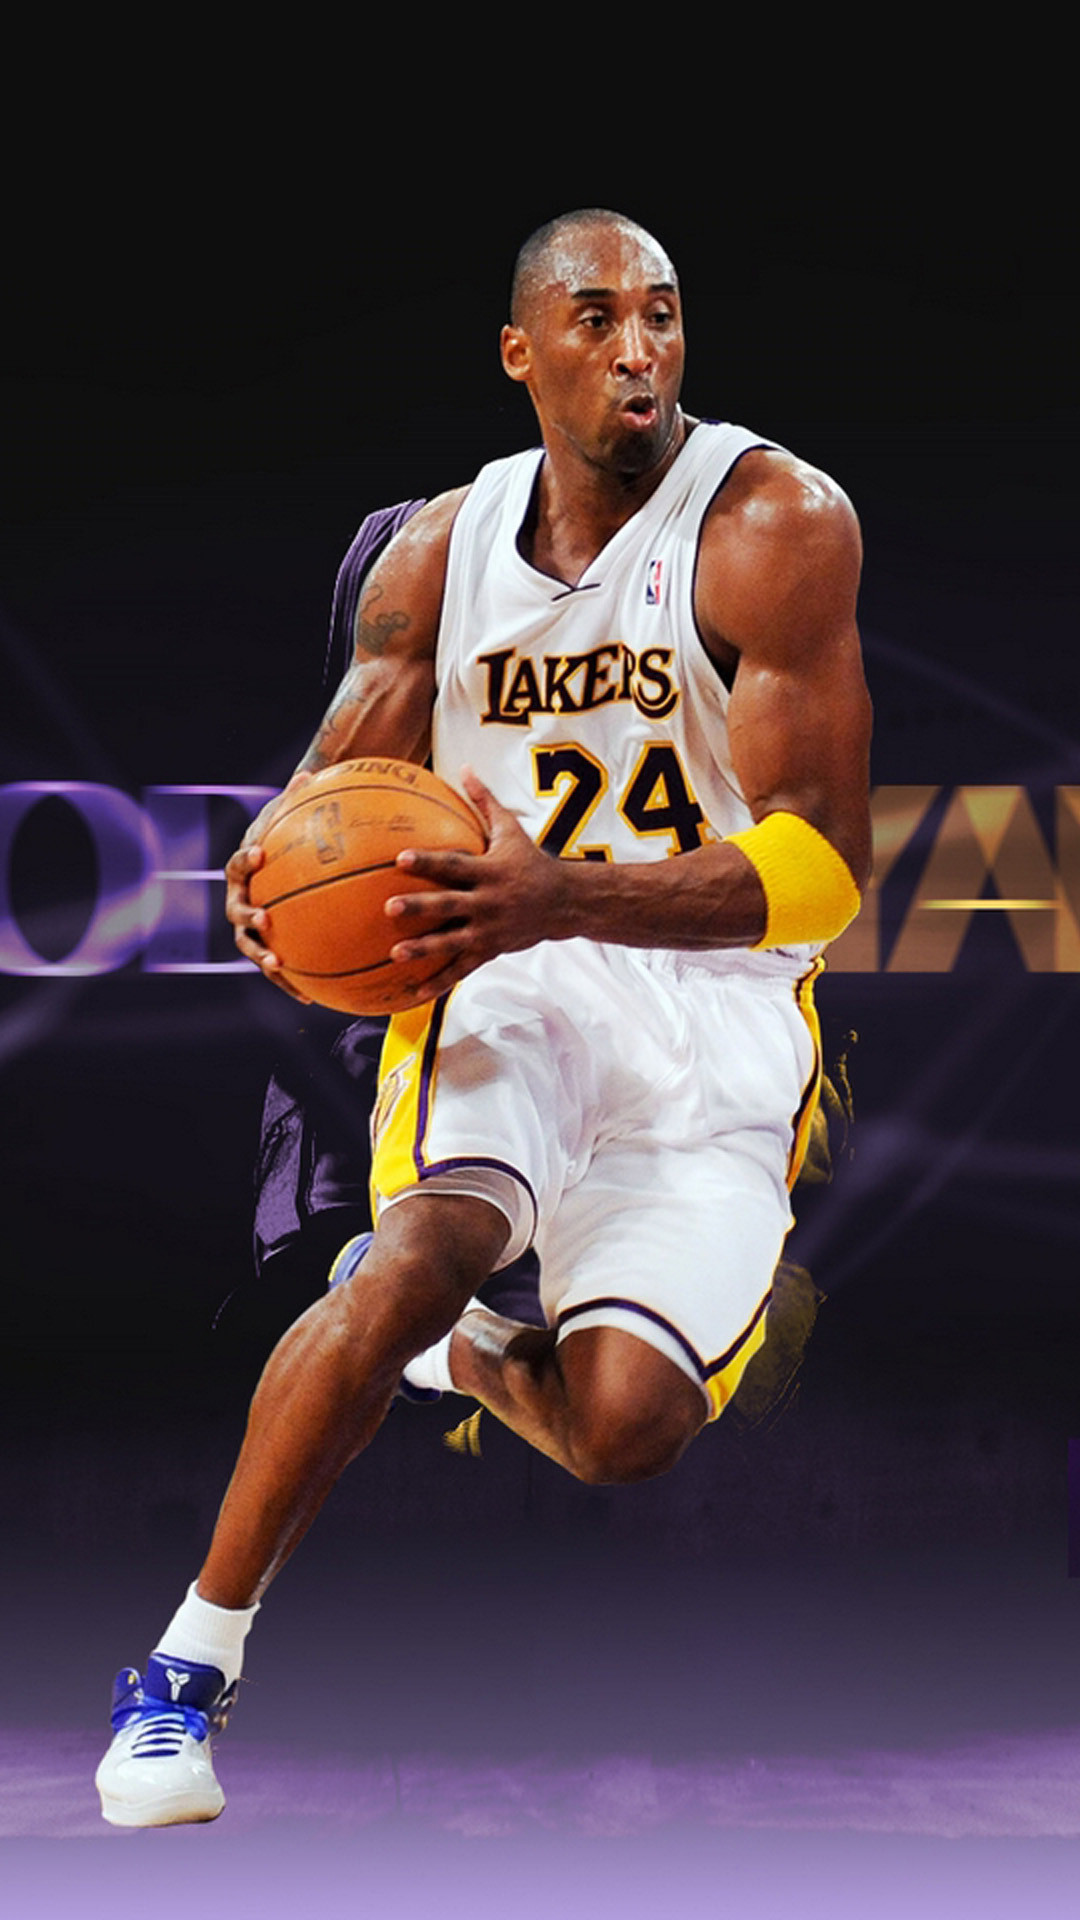 Kobe Bryant 02 Wallpapers for Samsung Galaxy S5